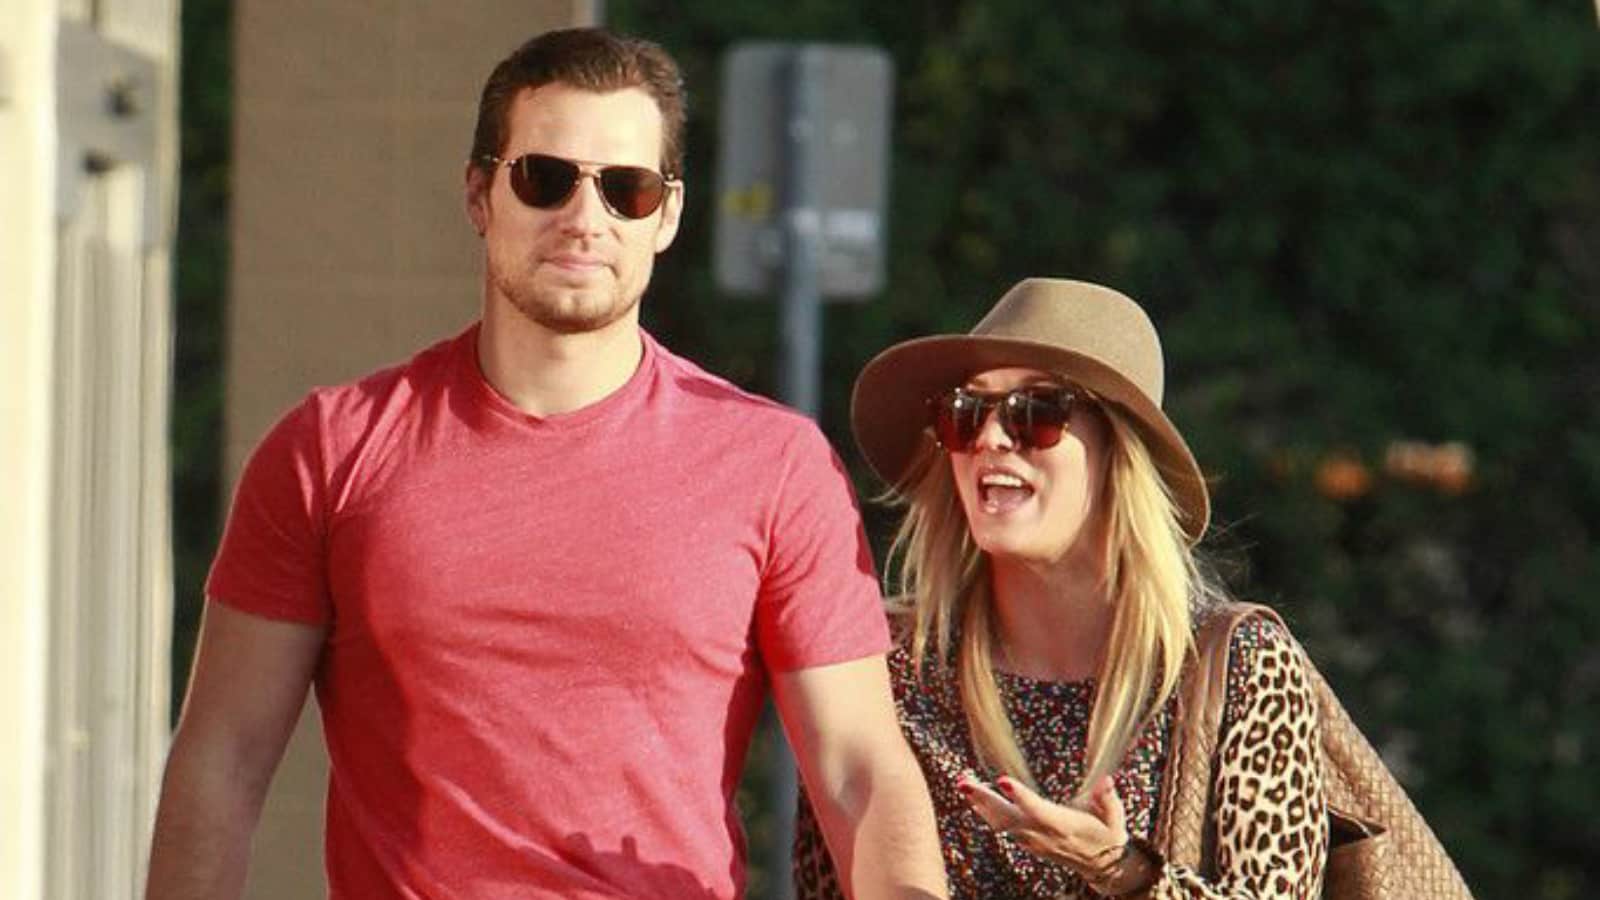 Kaley Cuoco and Henry Cavill snapped together near grocery store